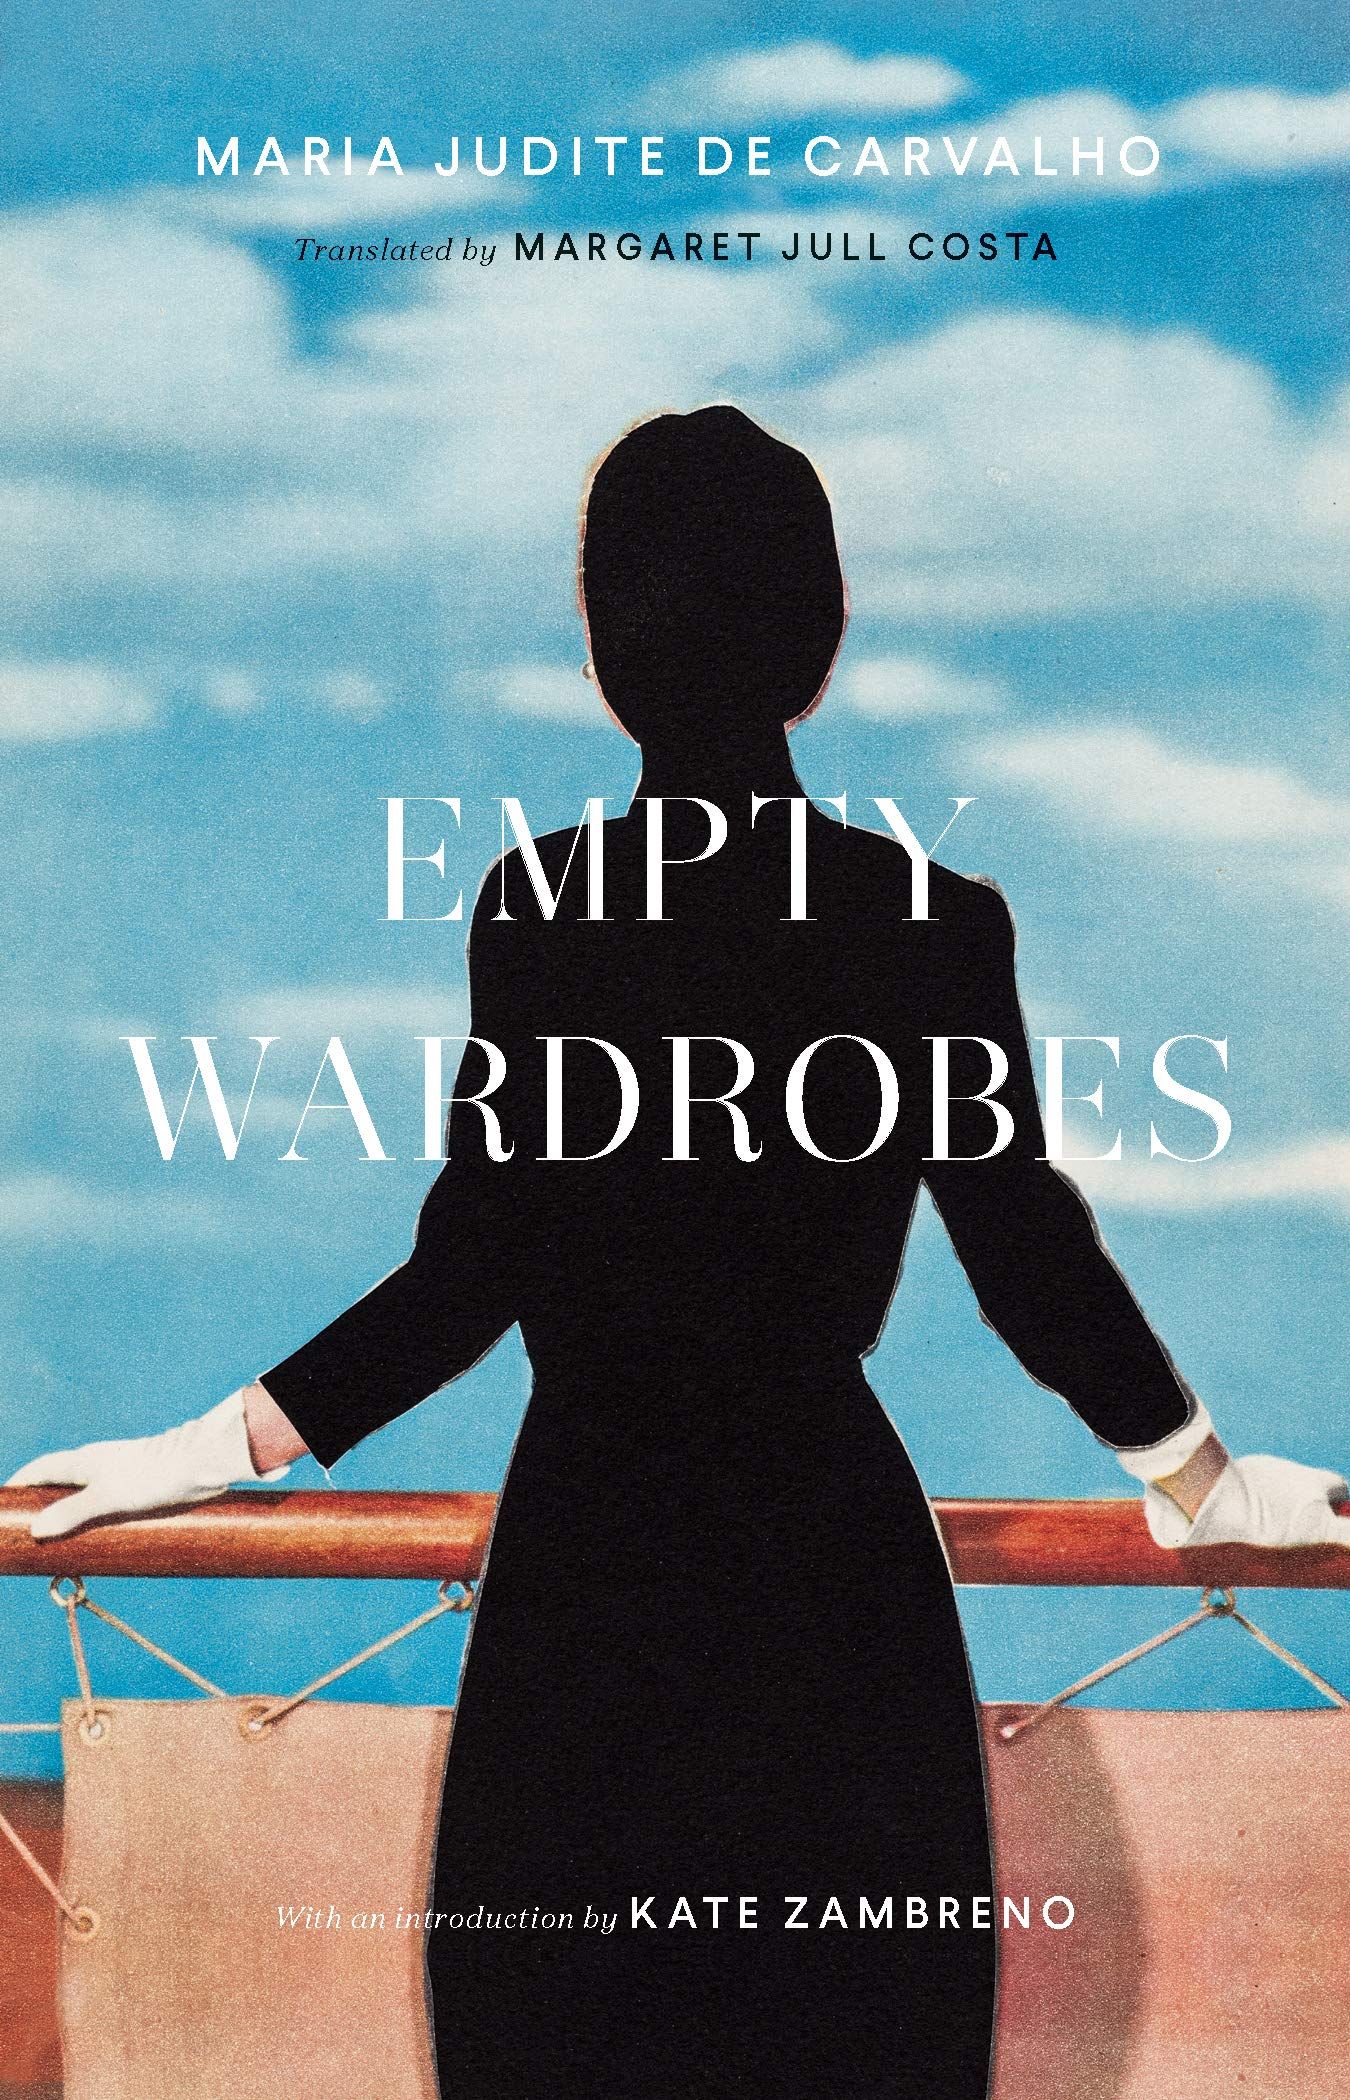 Empty Wardrobes by Maria Judite de Carvalho and translated by Margaret Jull Costa